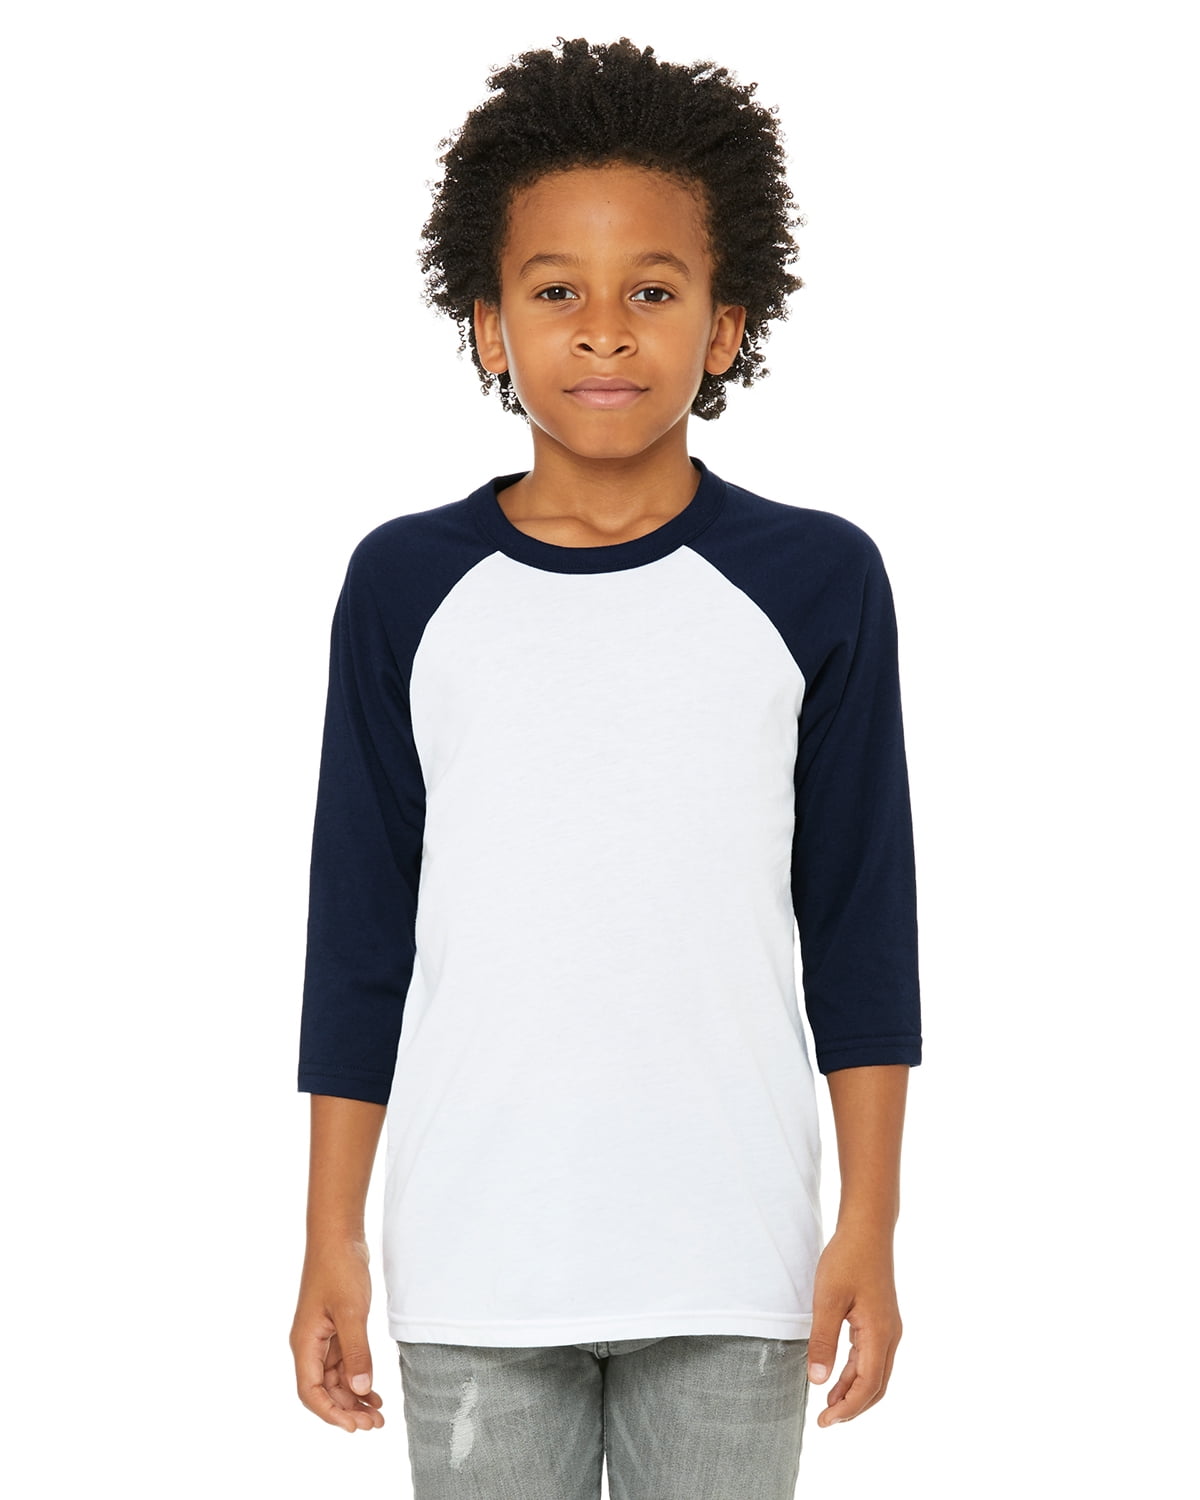 The Bella + Canvas Youth 3/4-Sleeve Baseball T-Shirt - WHITE/ NAVY - L ...